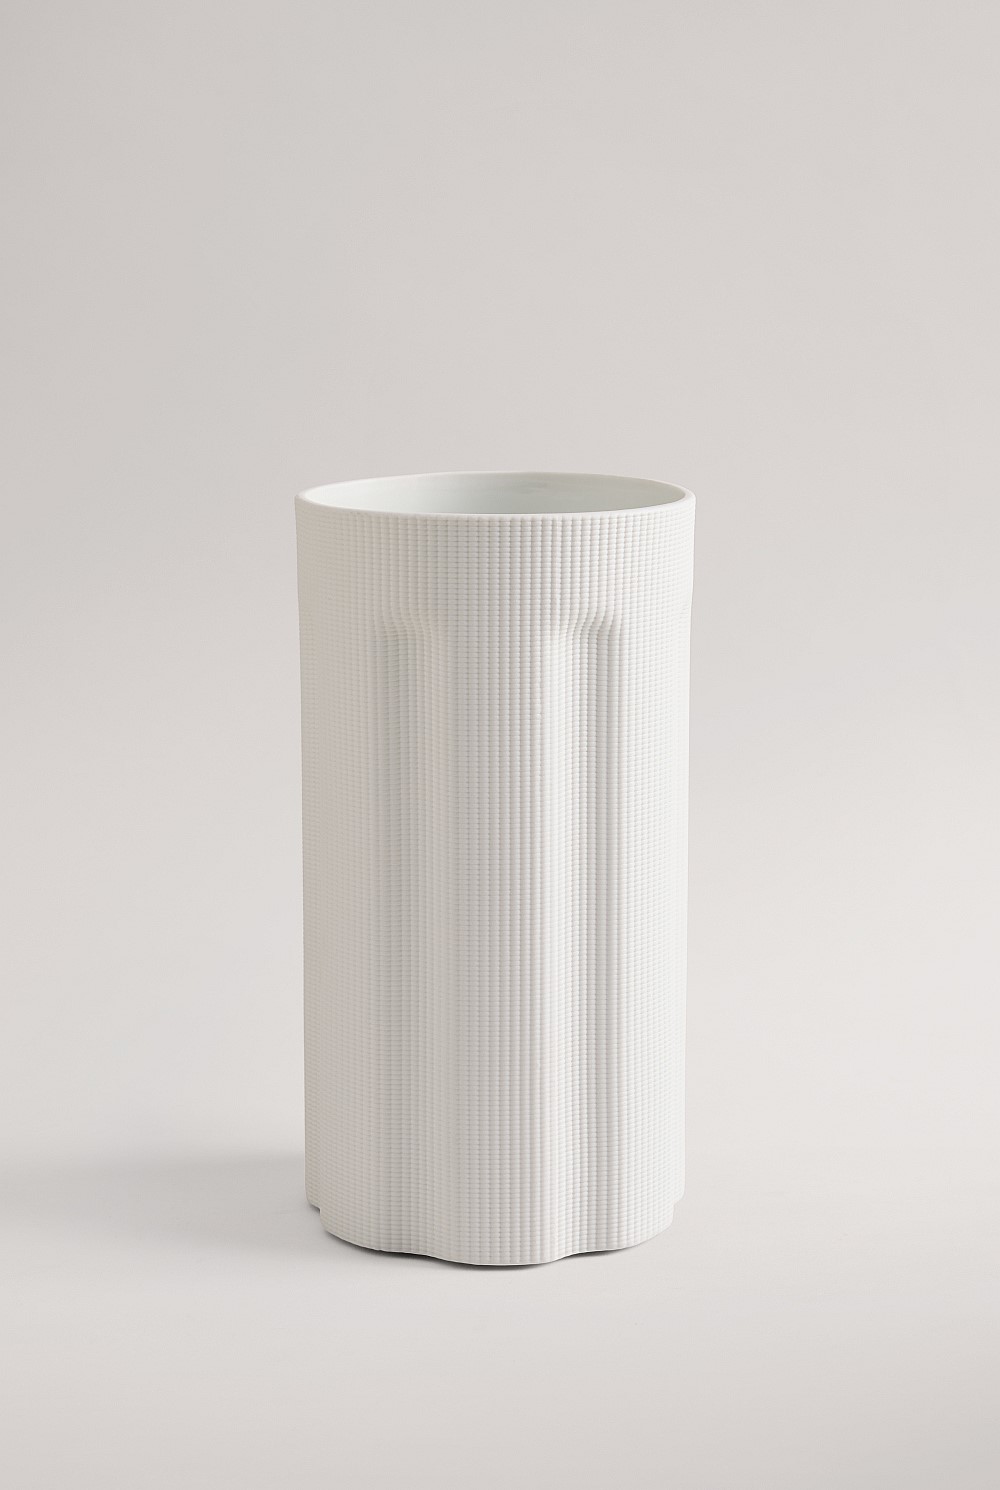 Edessa Small Vase from Country Road